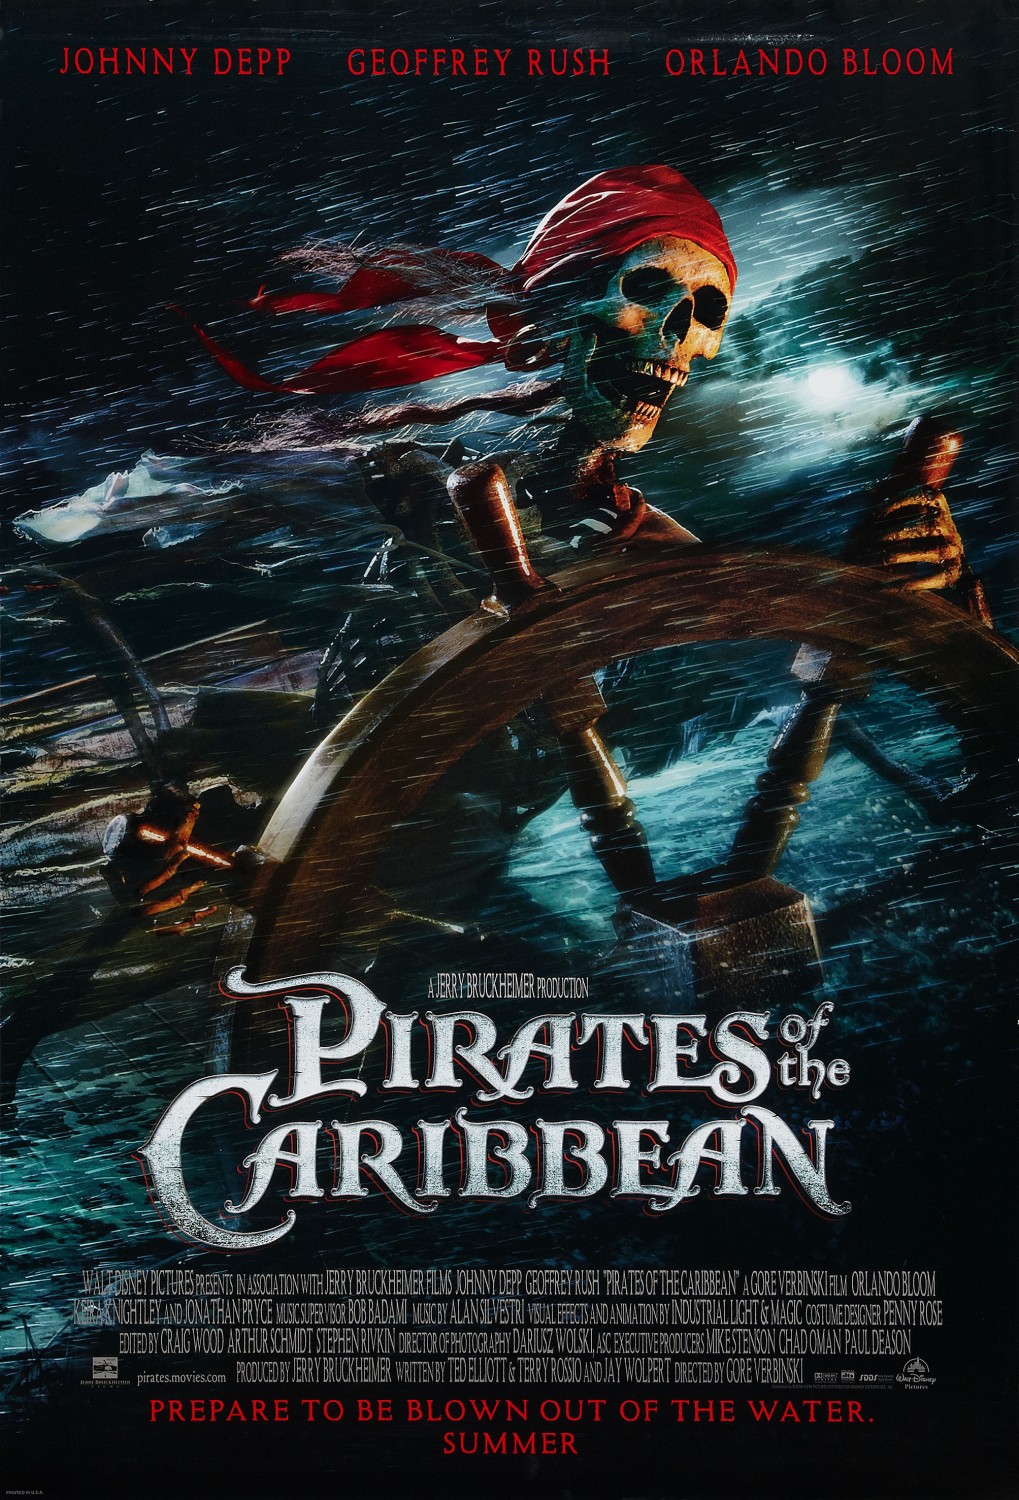 pirates of the caribbean the curse of the black pearl 1080p torrent download